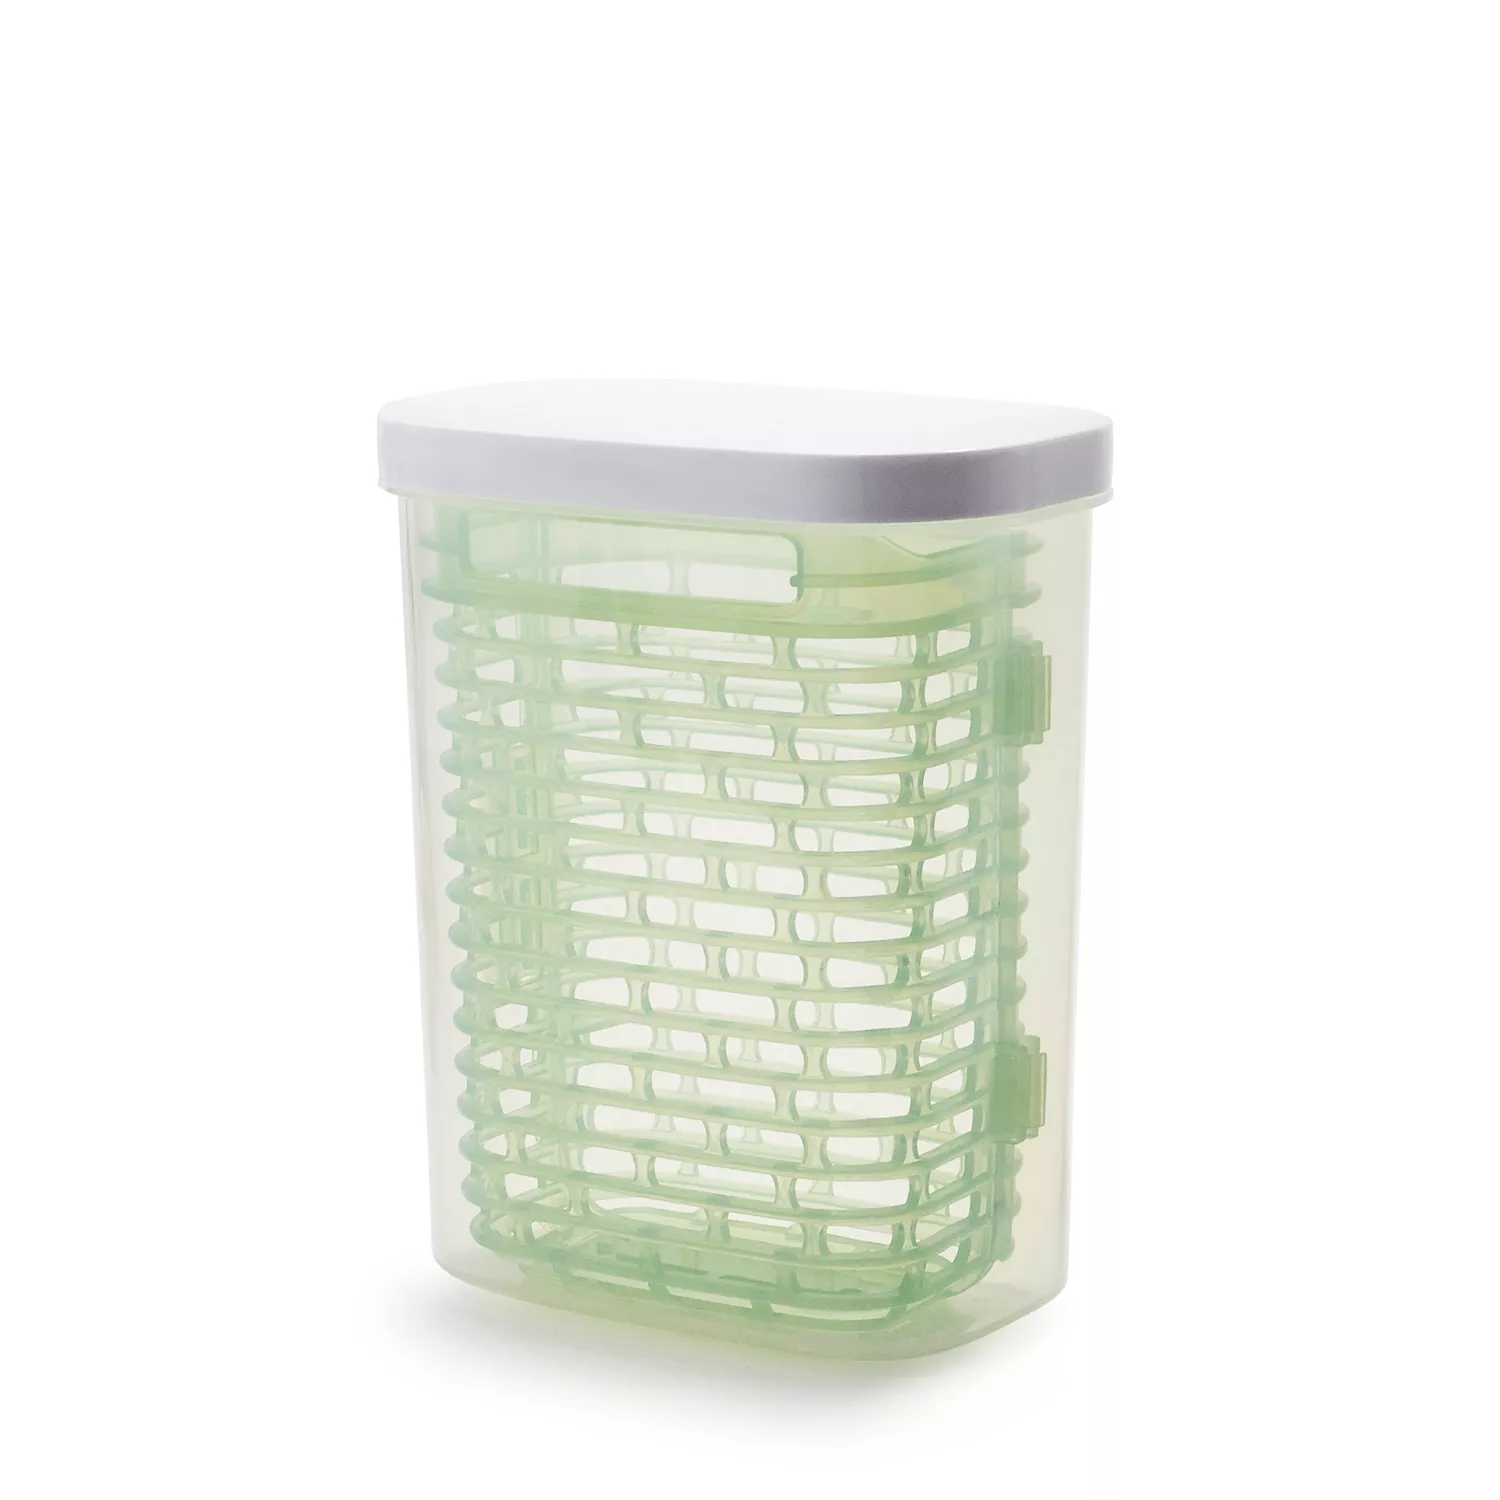 OXO GreenSaver Review: Read Our Honest Thoughts -PureWow